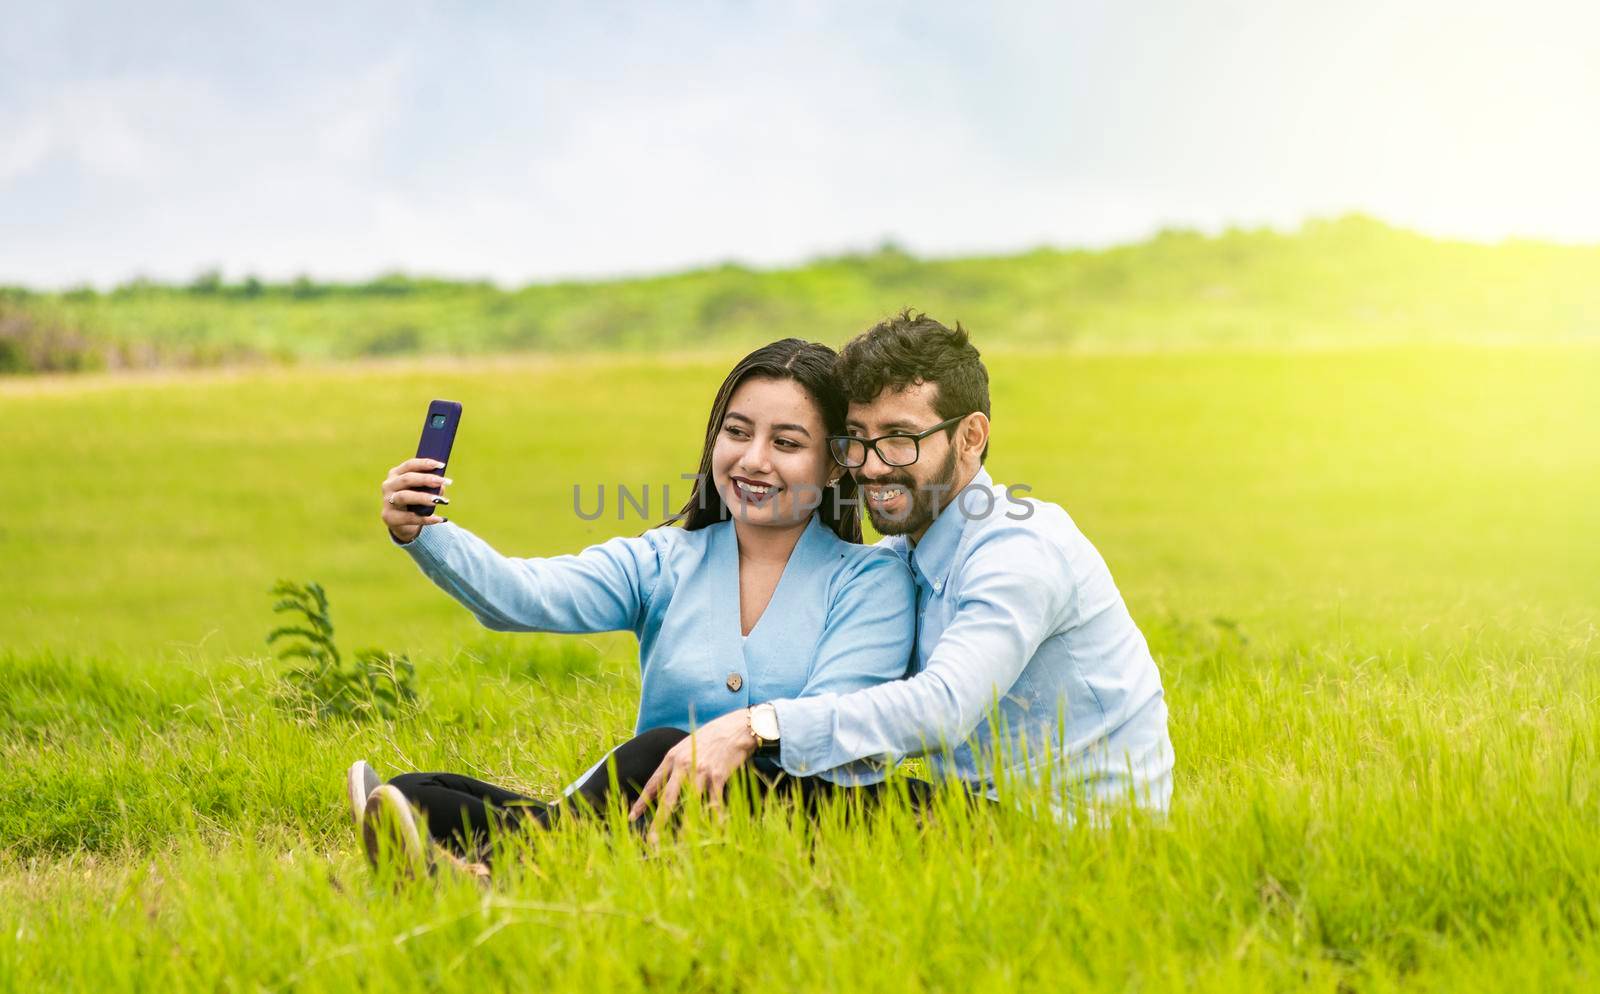 Smiling couple in love sitting on the grass taking selfies, Young couple in love taking a selfie in the field, People in love taking selfies in the field with their smartphone by isaiphoto